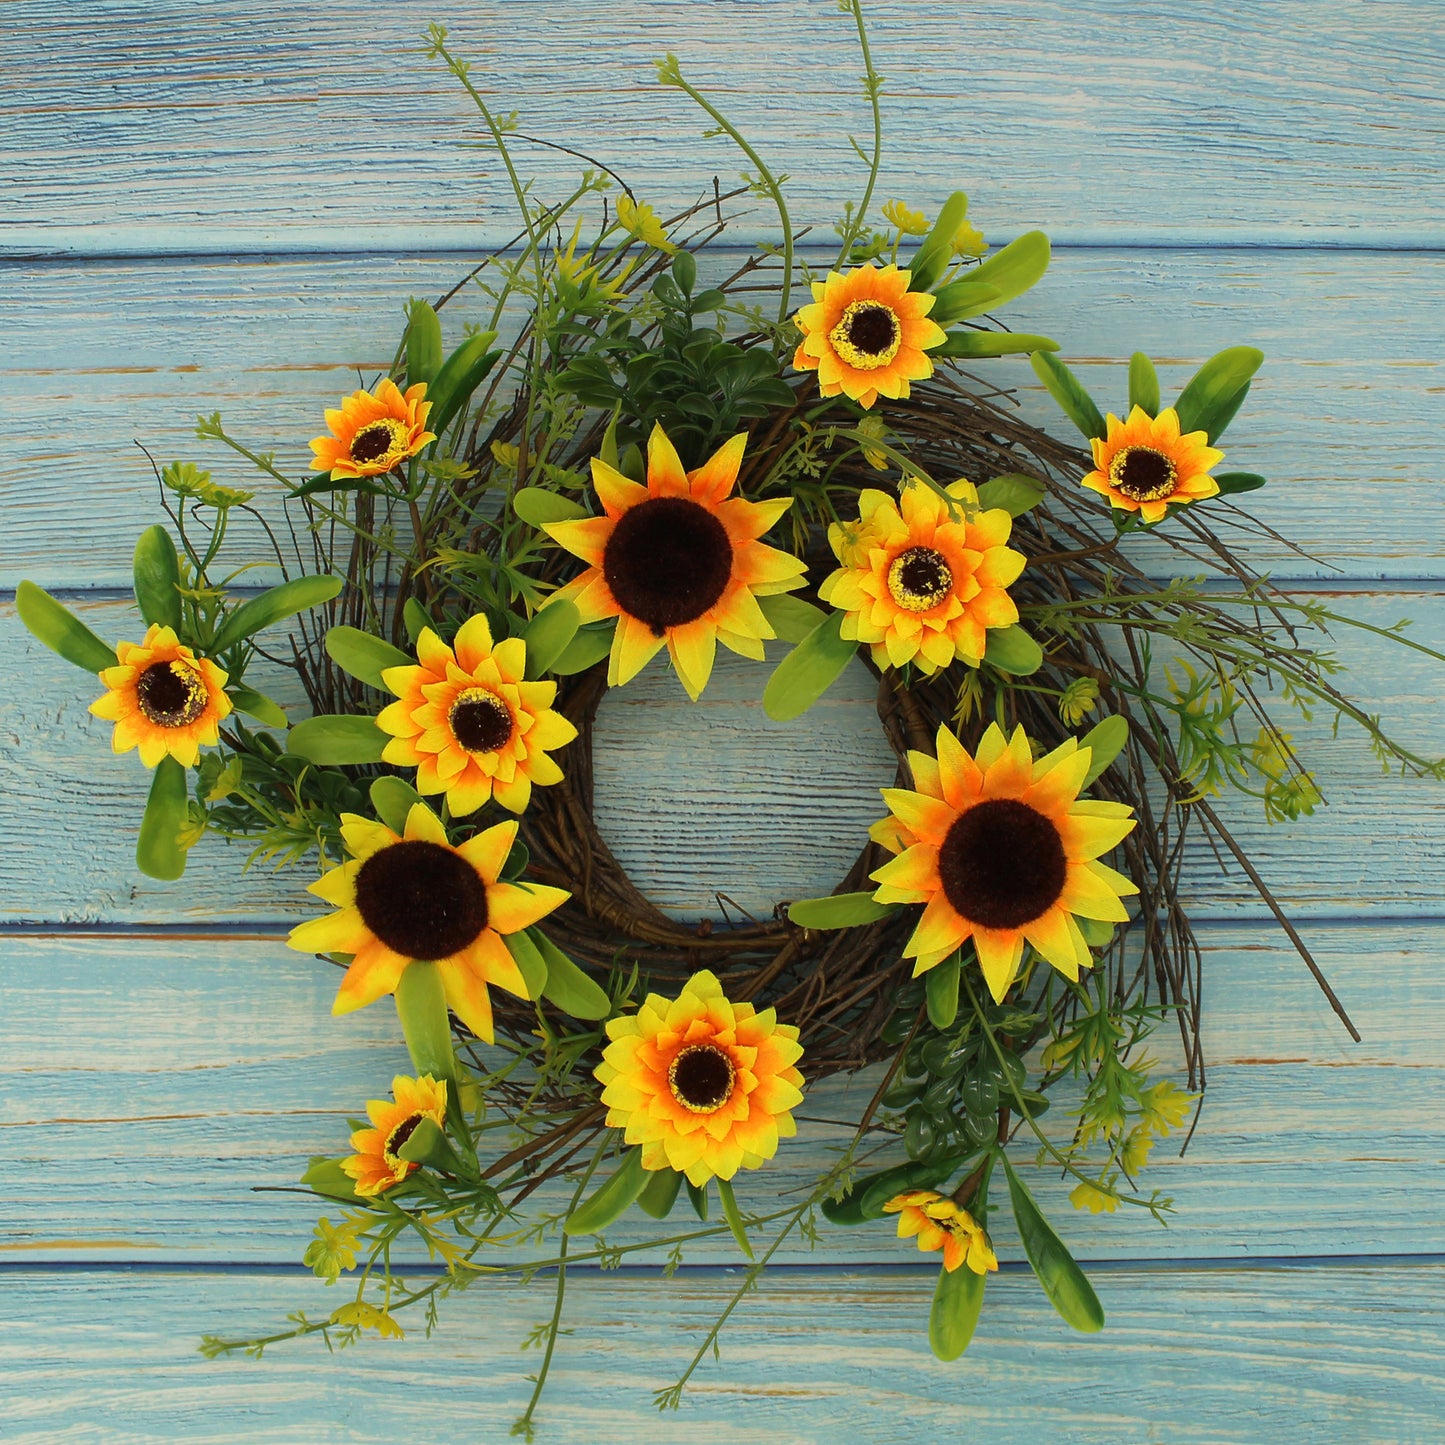 CVHOMEDECO. Rustic Country Artificial Sunflower and Twig Wreath, Year Round Full Green Wreath for Indoor or Outdoor Display, 12 Inch